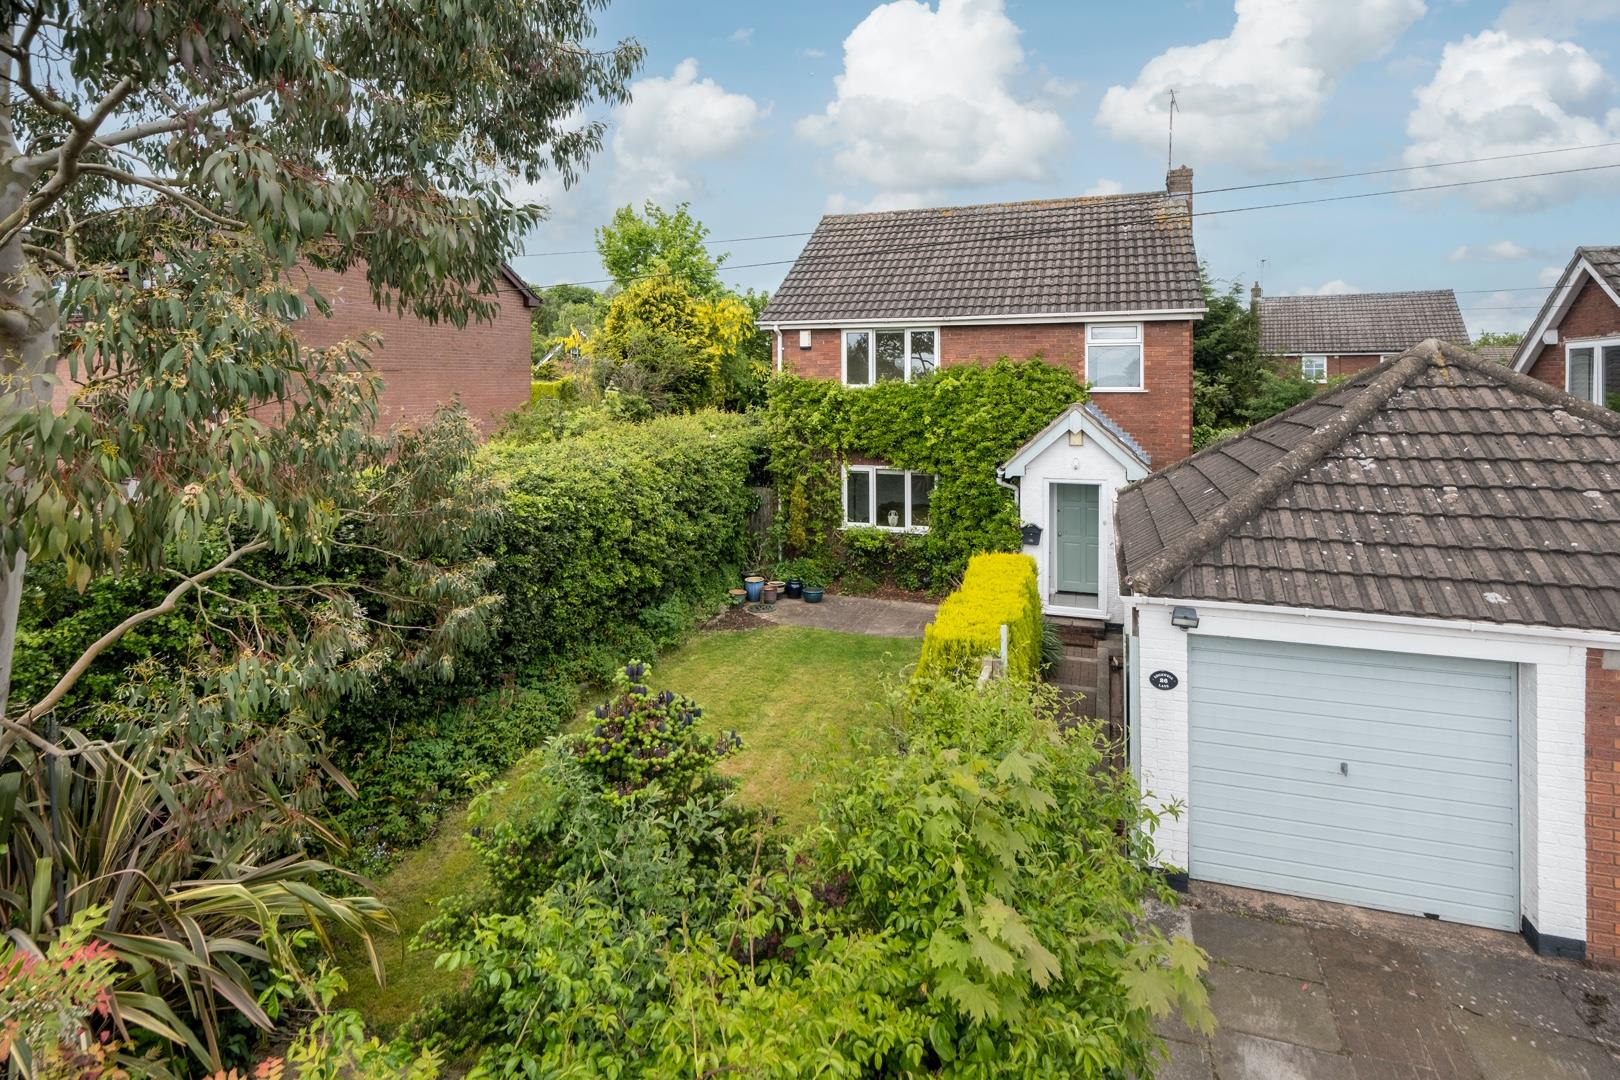 3 bedroom  Detached House for Sale in Eaton